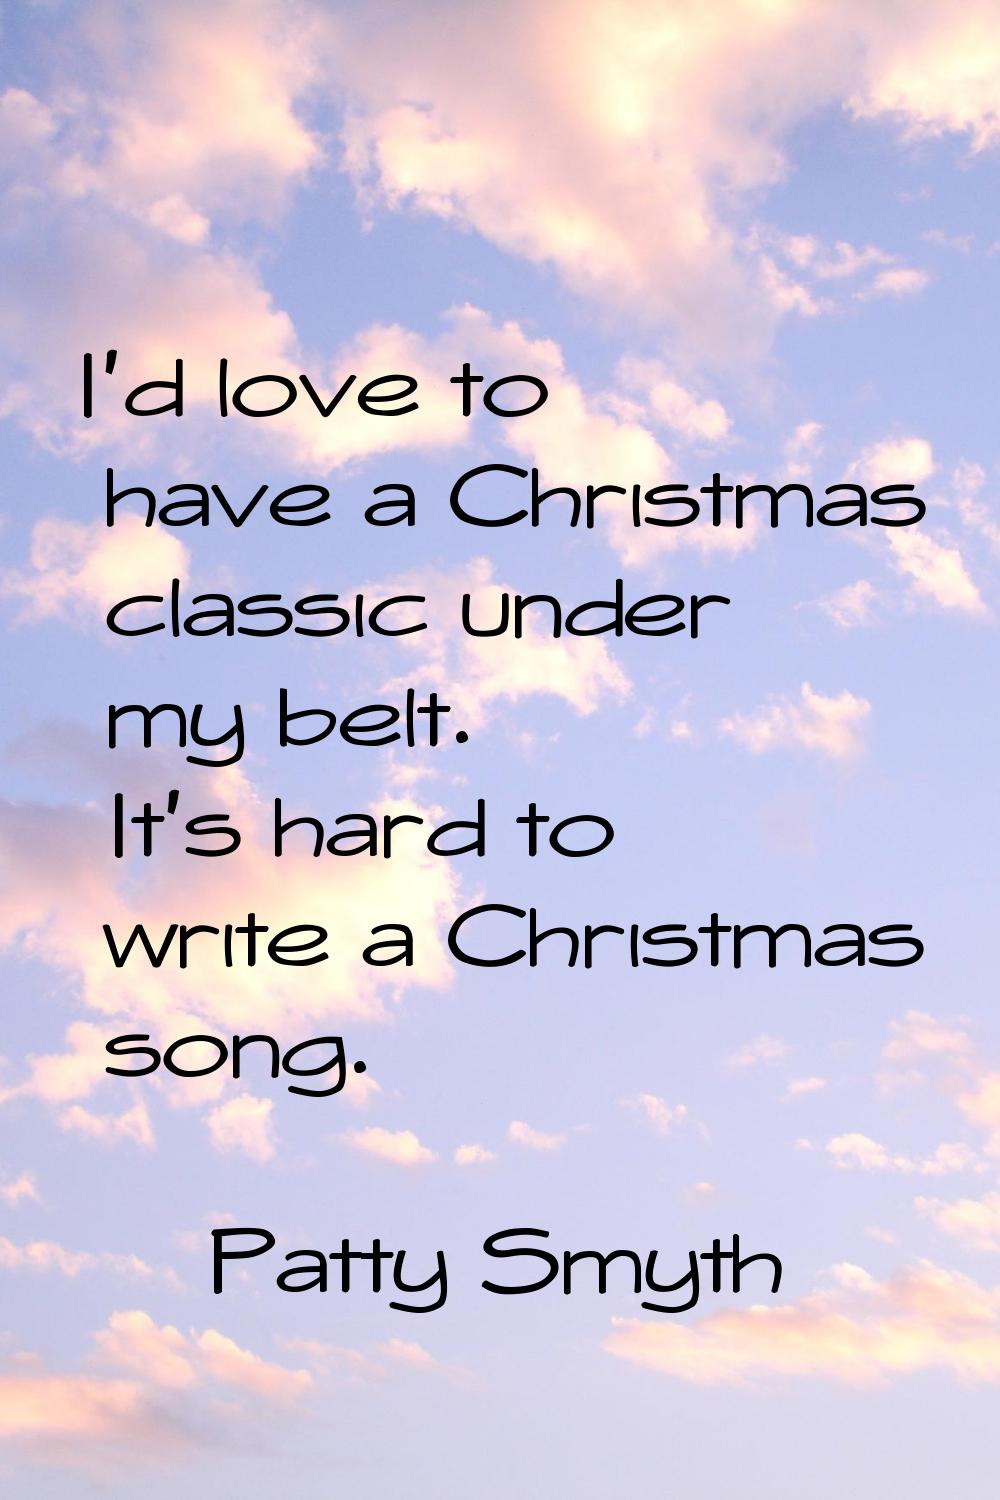 I'd love to have a Christmas classic under my belt. It's hard to write a Christmas song.